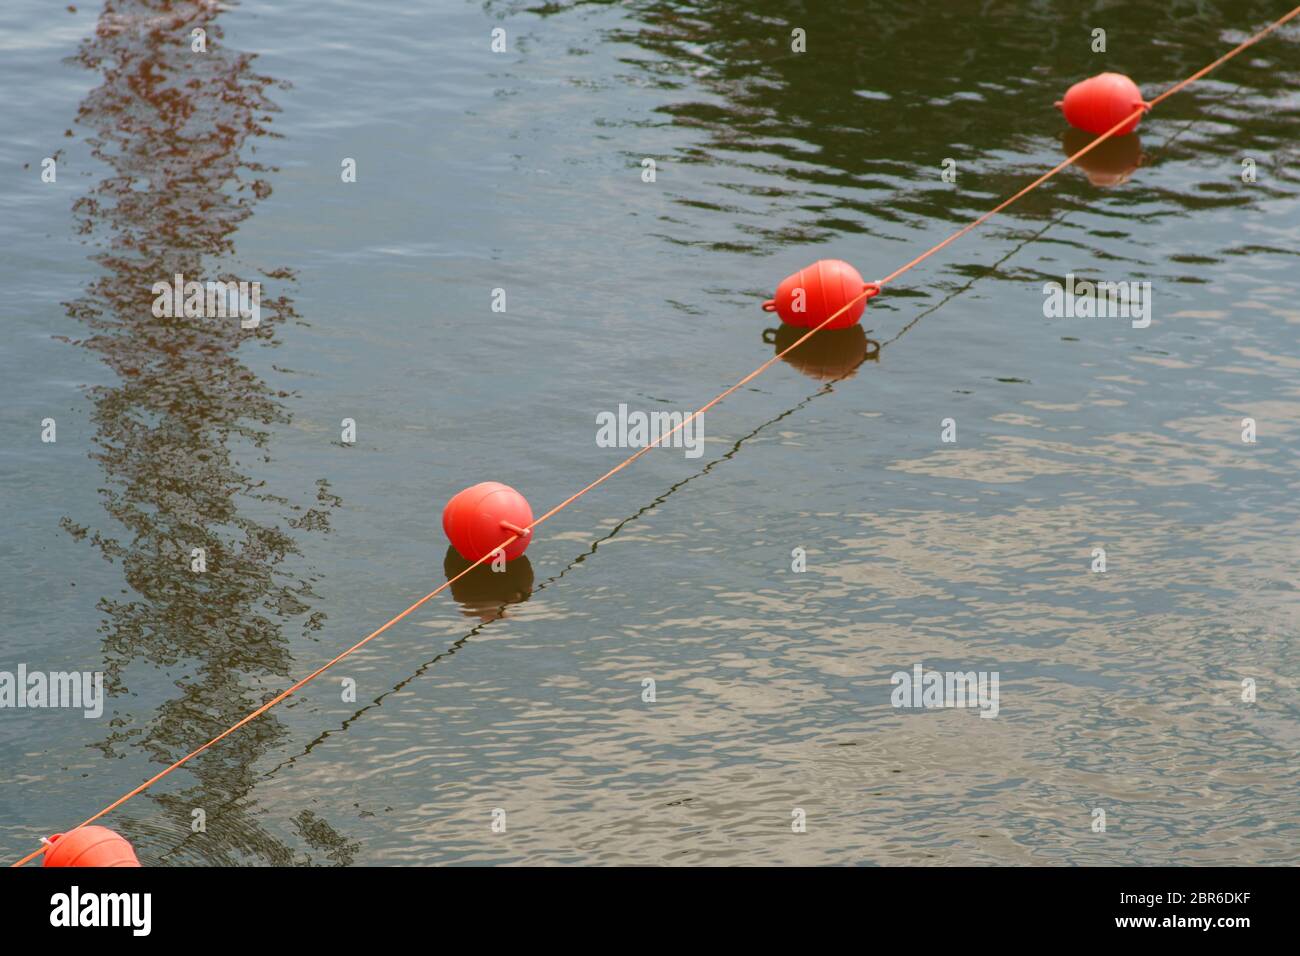 A stretched rope with juxtaposed swimming buoys to block traffic in the inland port. Stock Photo